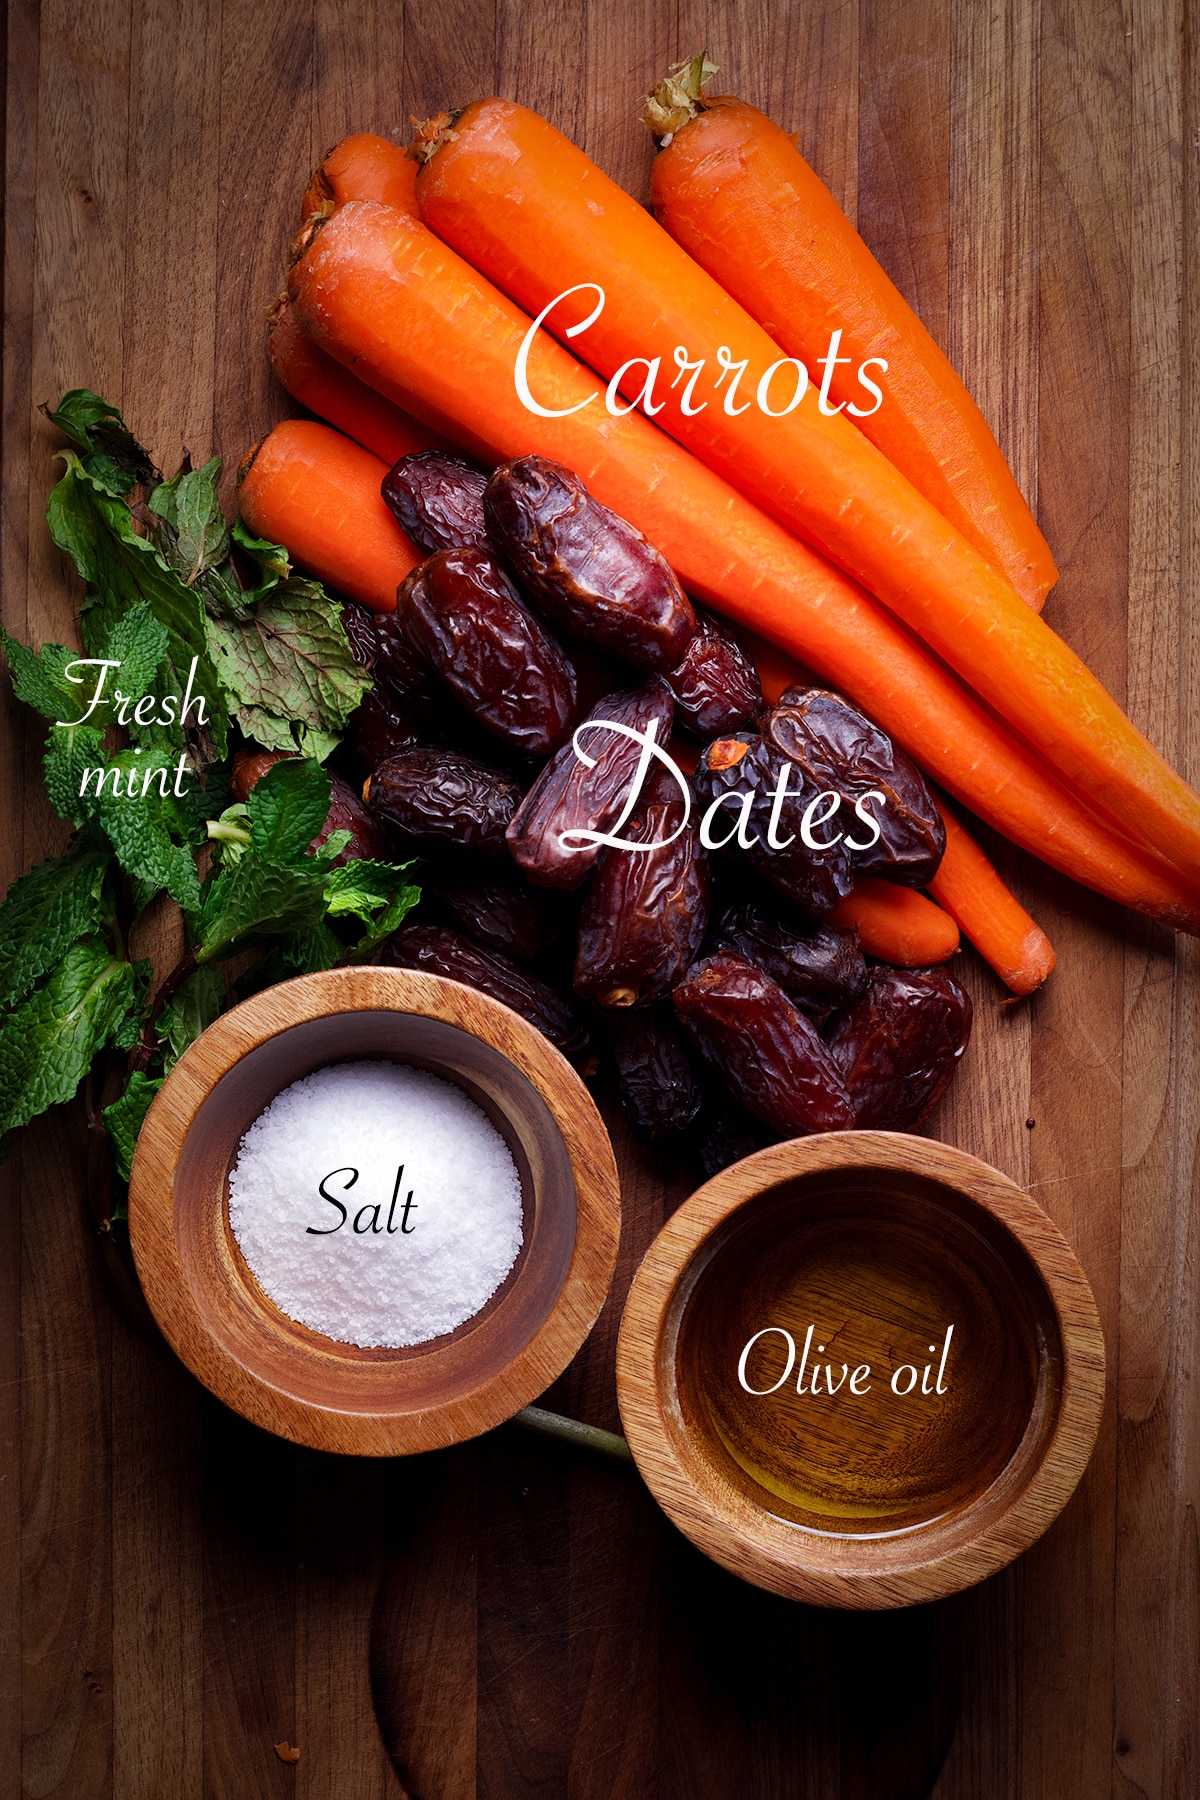 All the ingredients you need to prepare roasted carrots and dates.